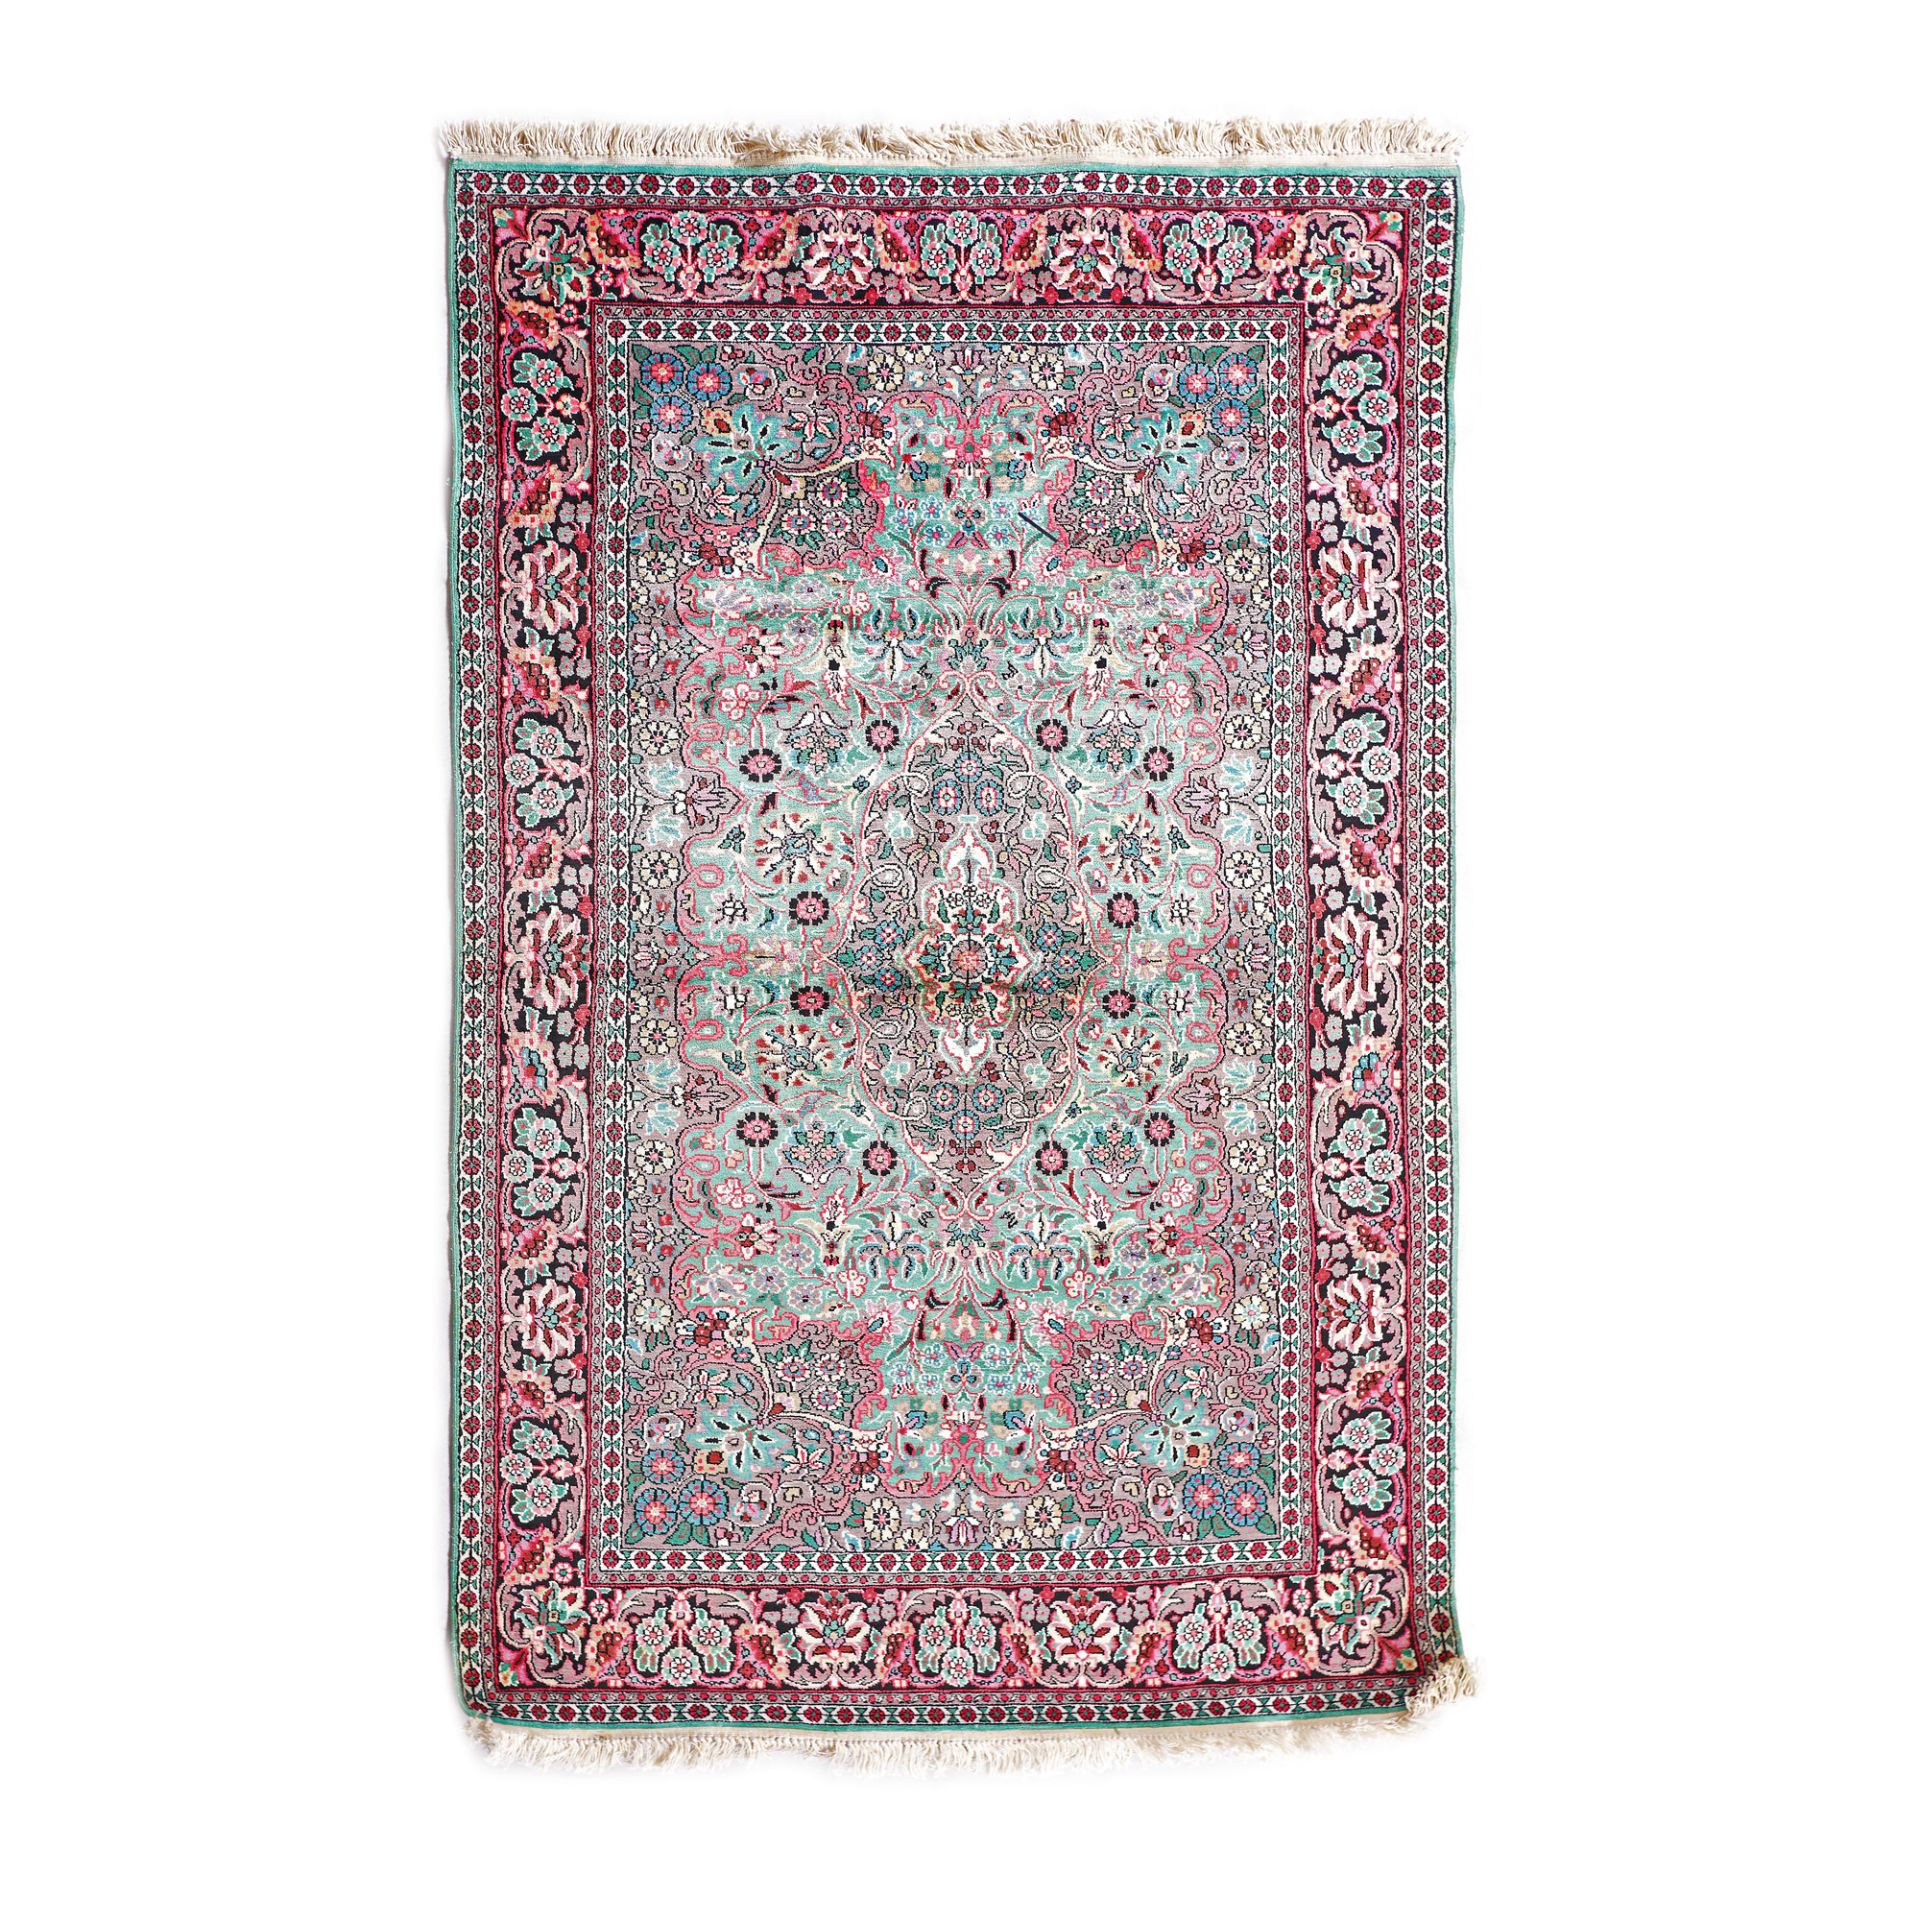 Kashmir rug, silk and cotton, decorated with floral motifs, India